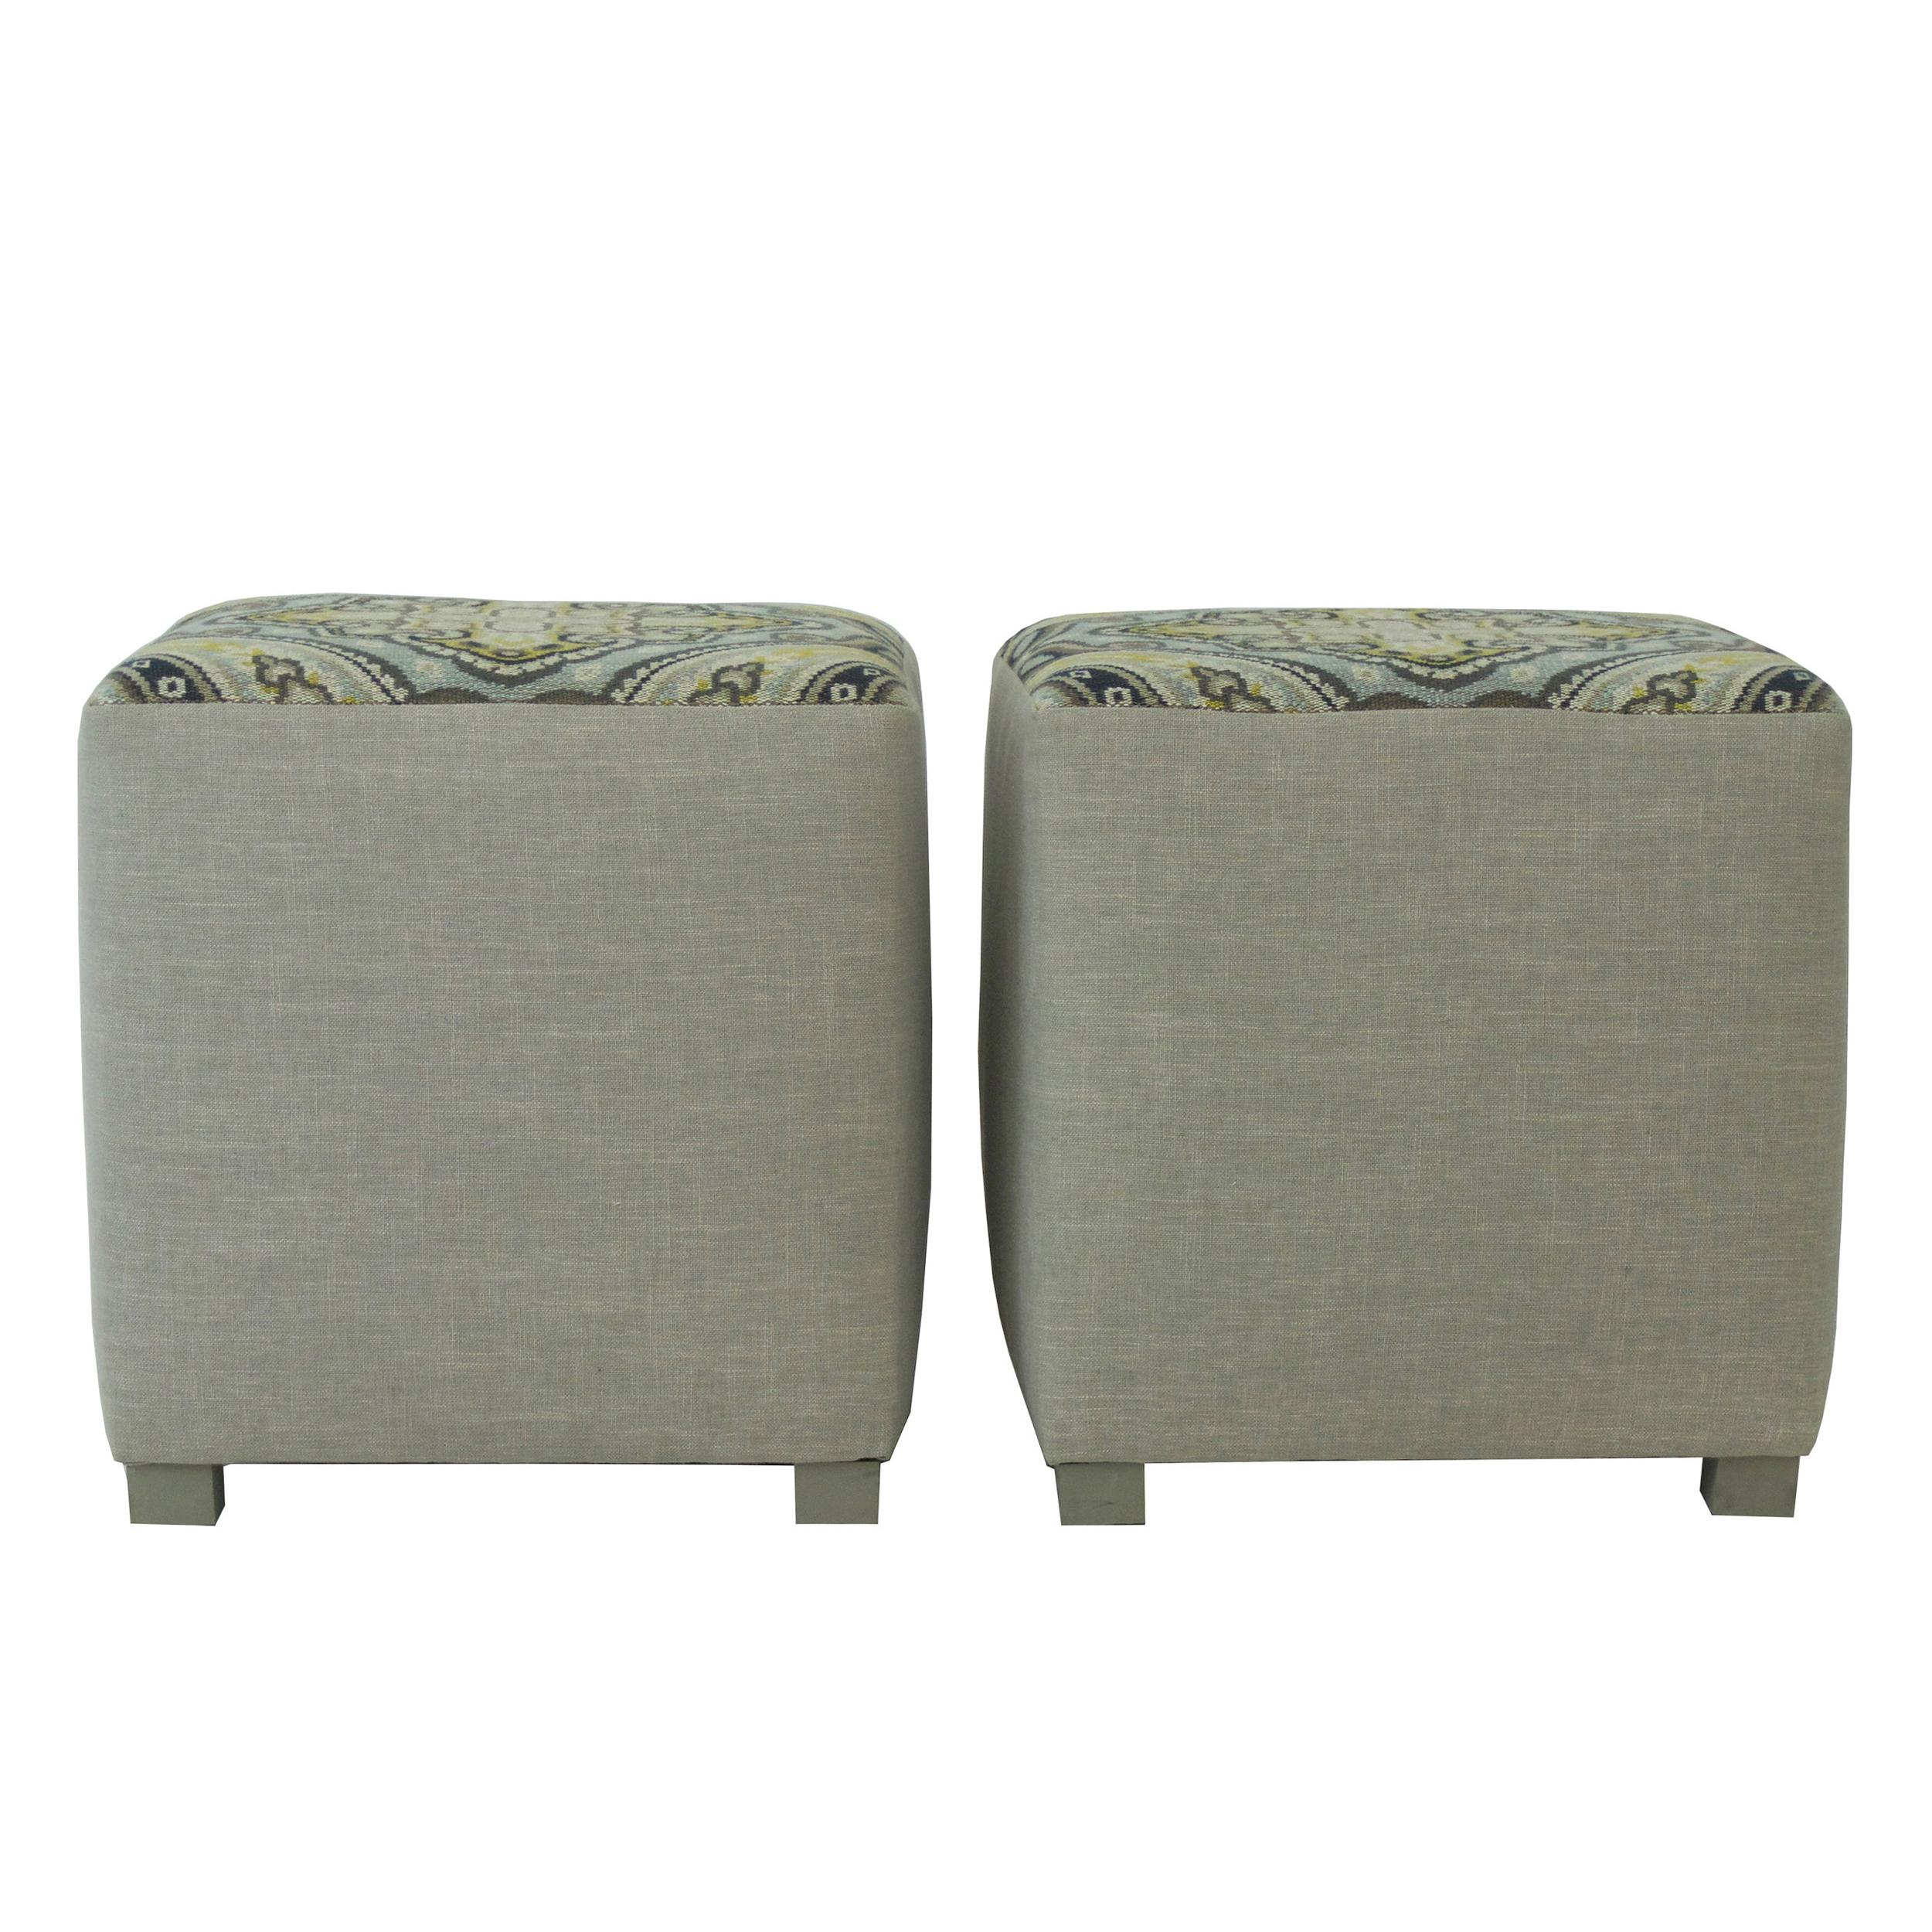 Modern Upholstered Cube Ottoman For Sale